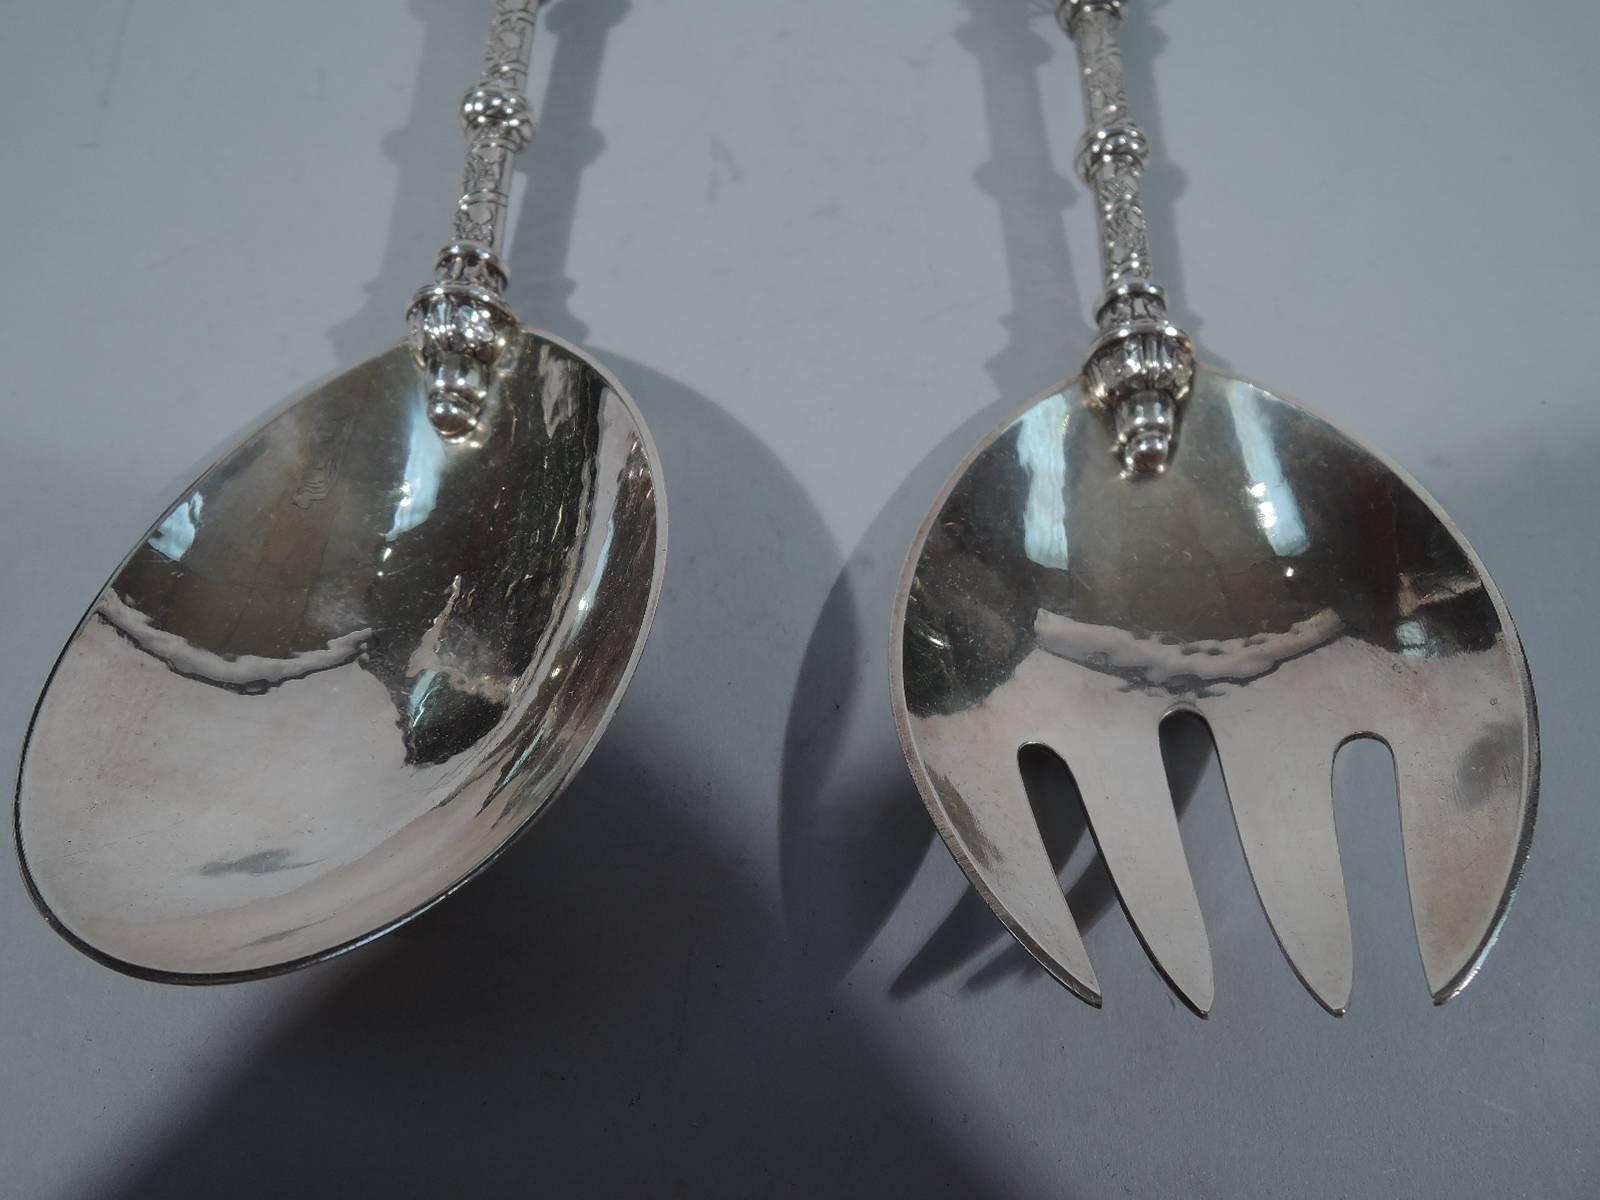 20th Century Early and Rare Georg Jensen Sterling Silver Salad Serving Pair with Regal Crown